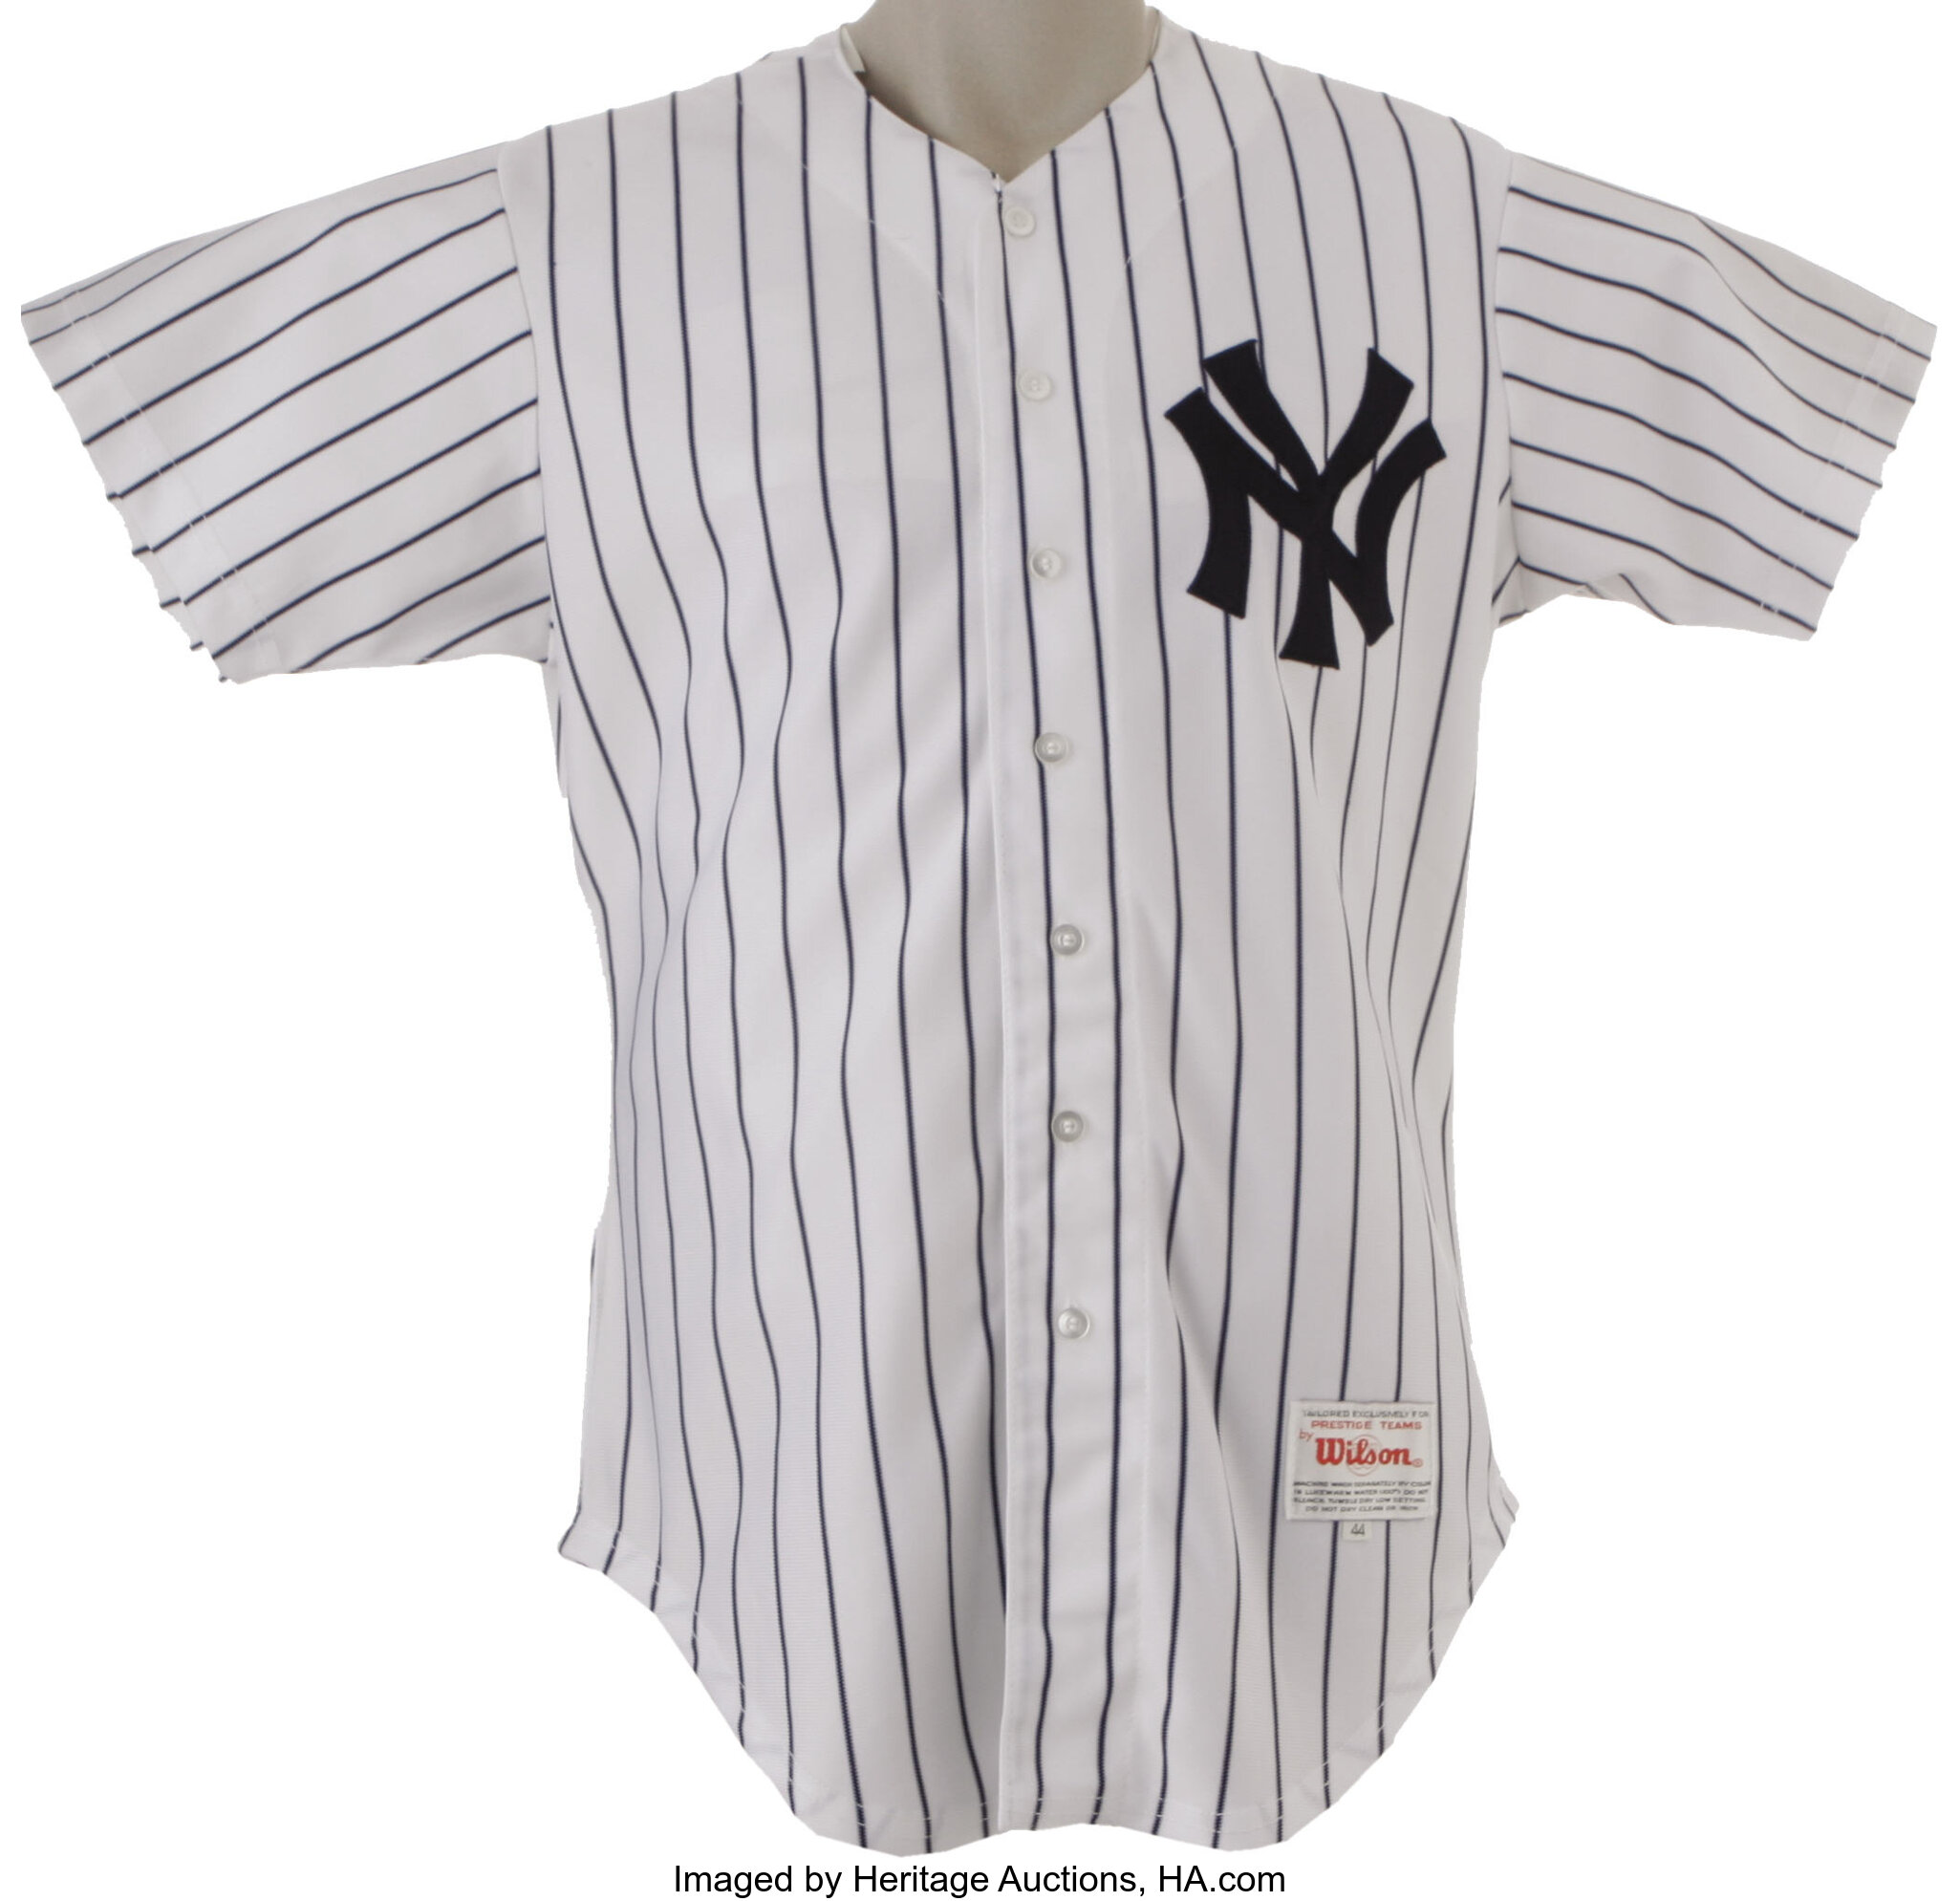 1990 Joe DiMaggio Old Timers Day Worn Jersey. Returning to the same, Lot  #19671